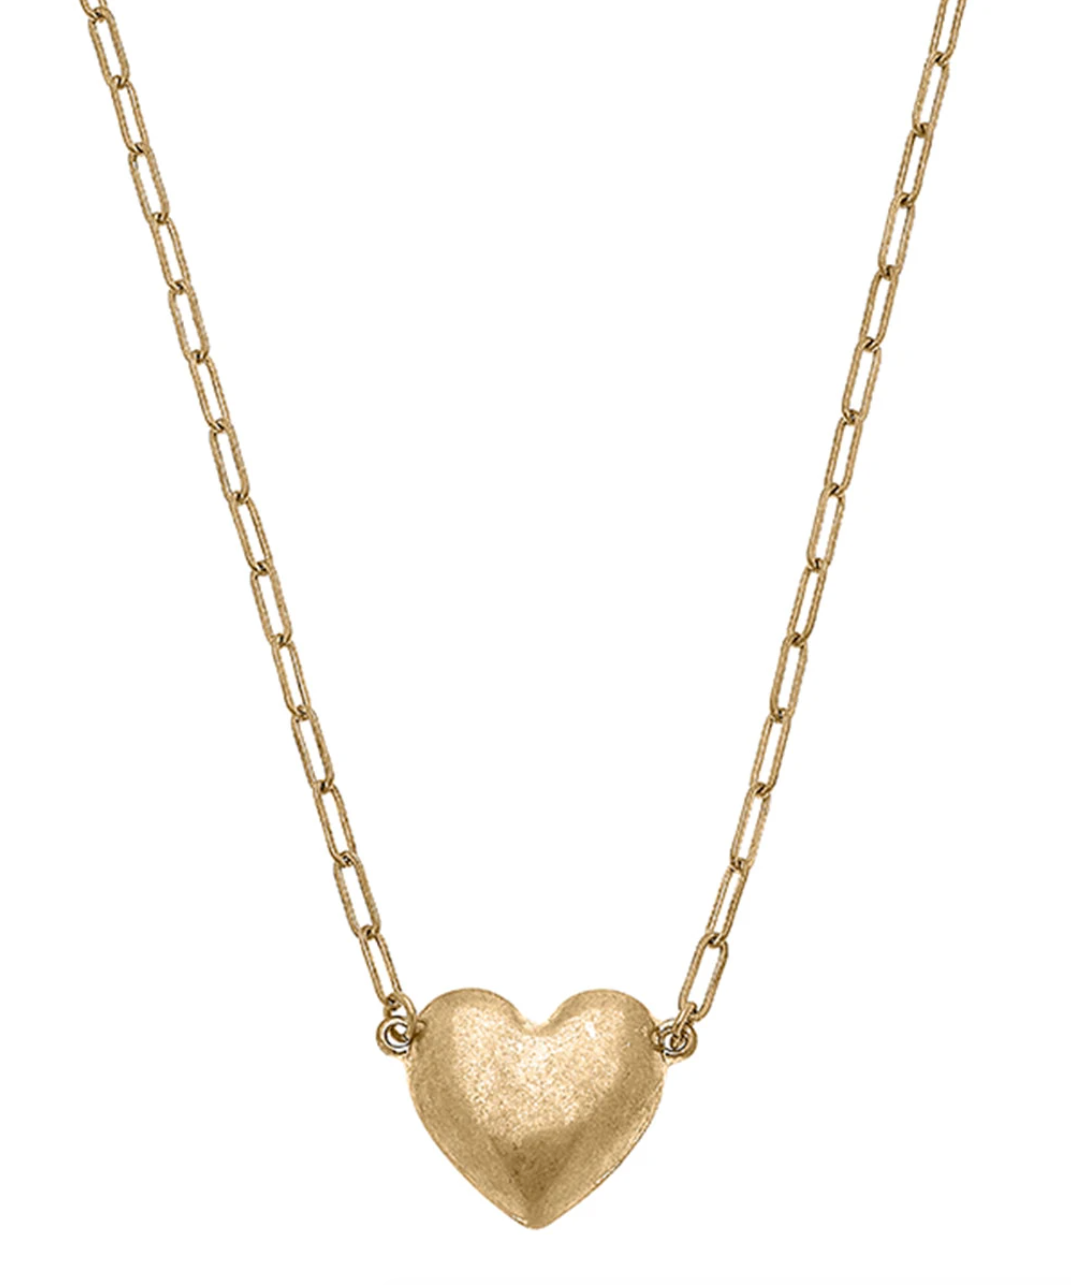 Necklace Heart & Chain Puffed Shae